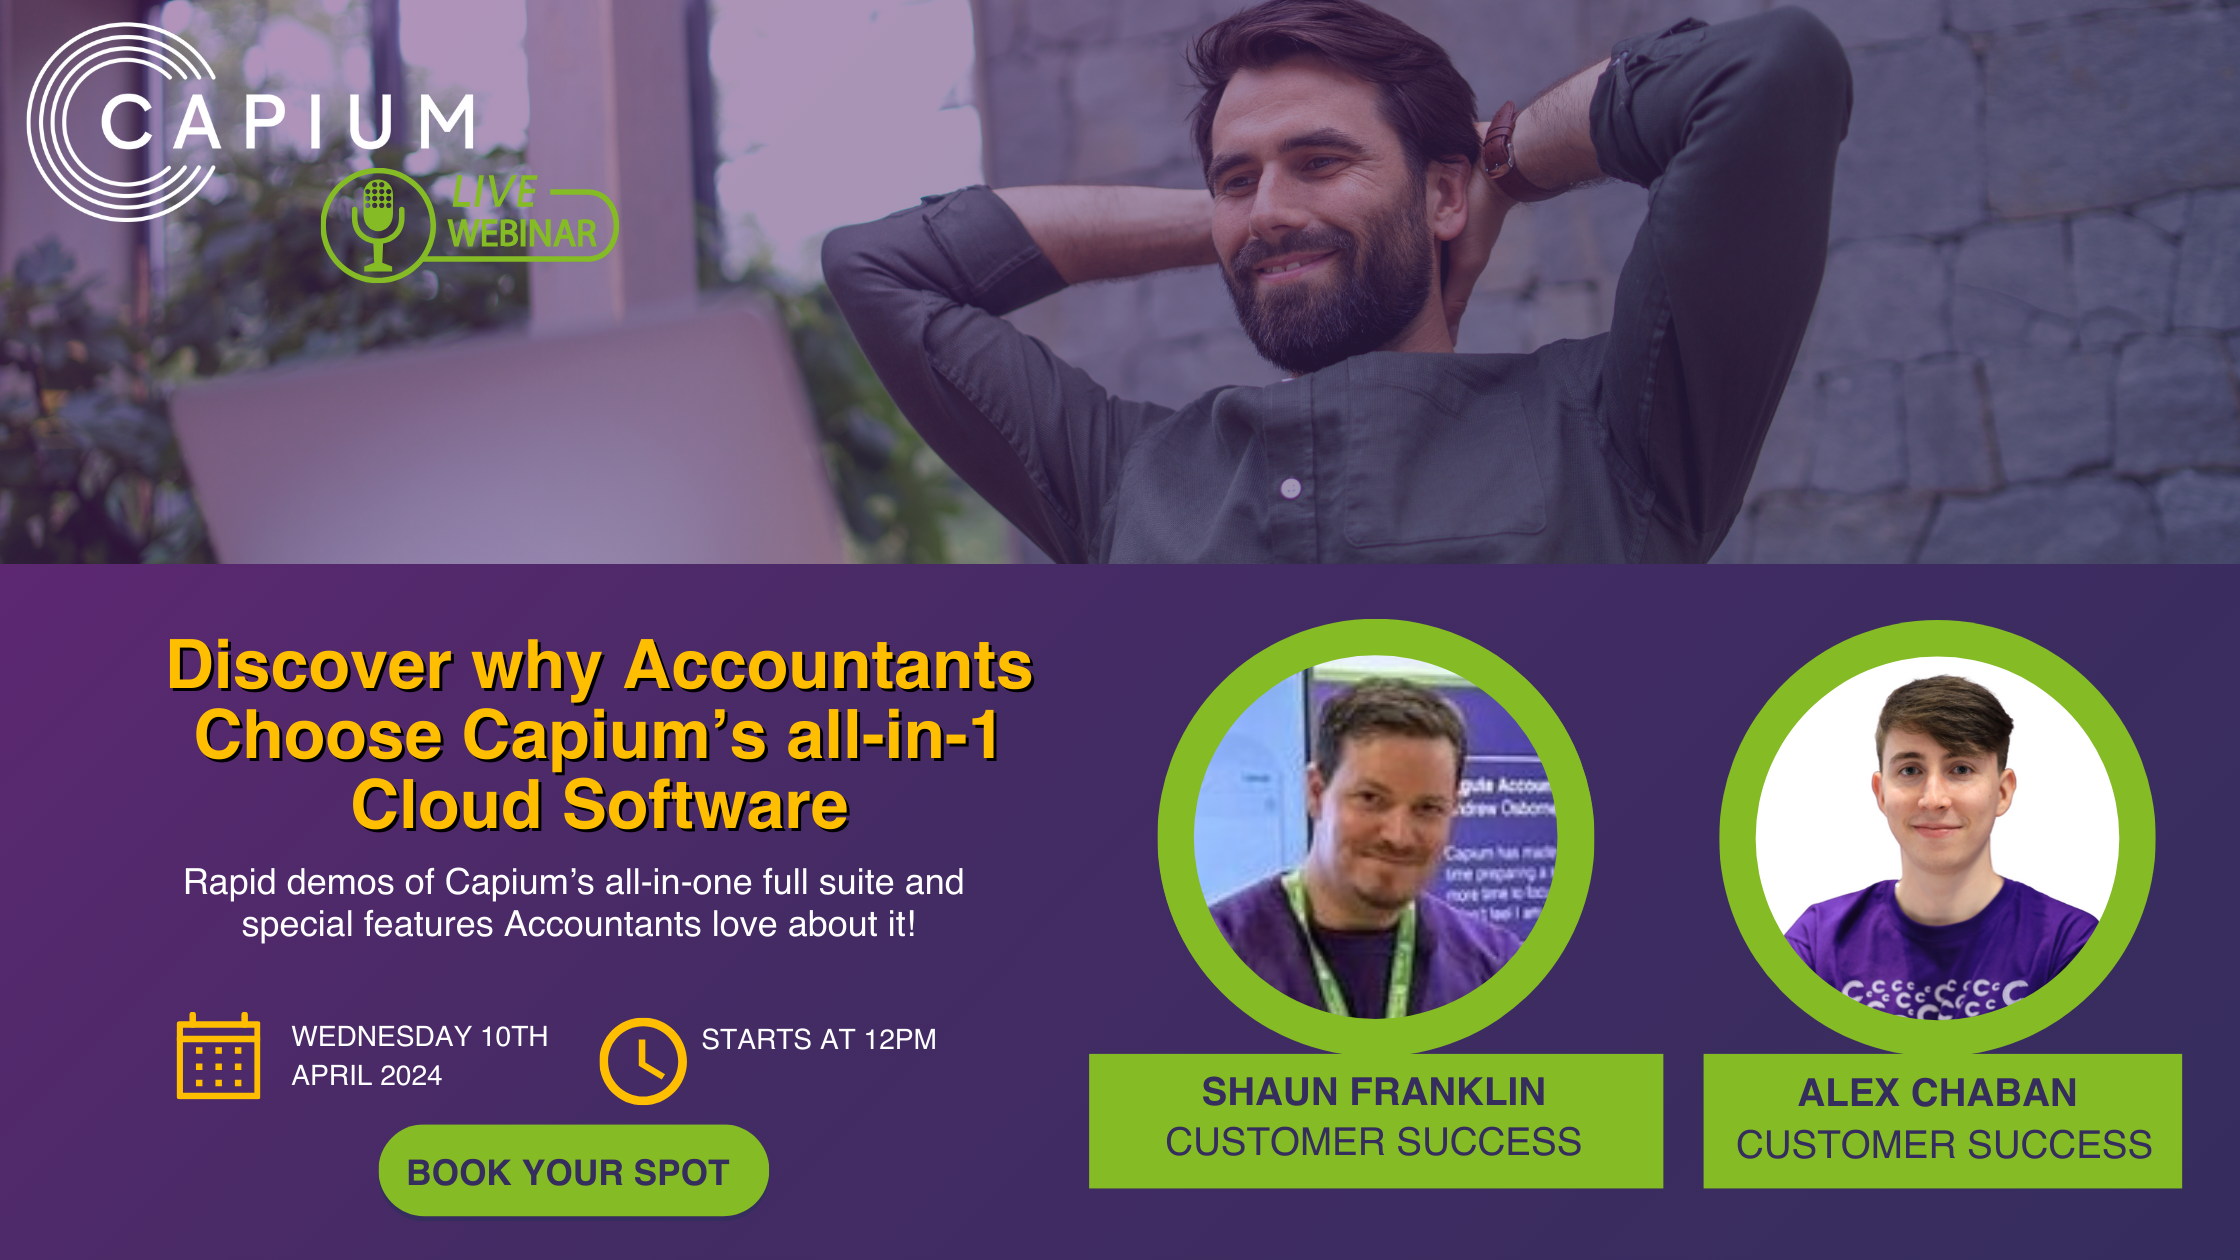 Discover why Accountants Choose Capium’s all-in-1 Cloud Software image